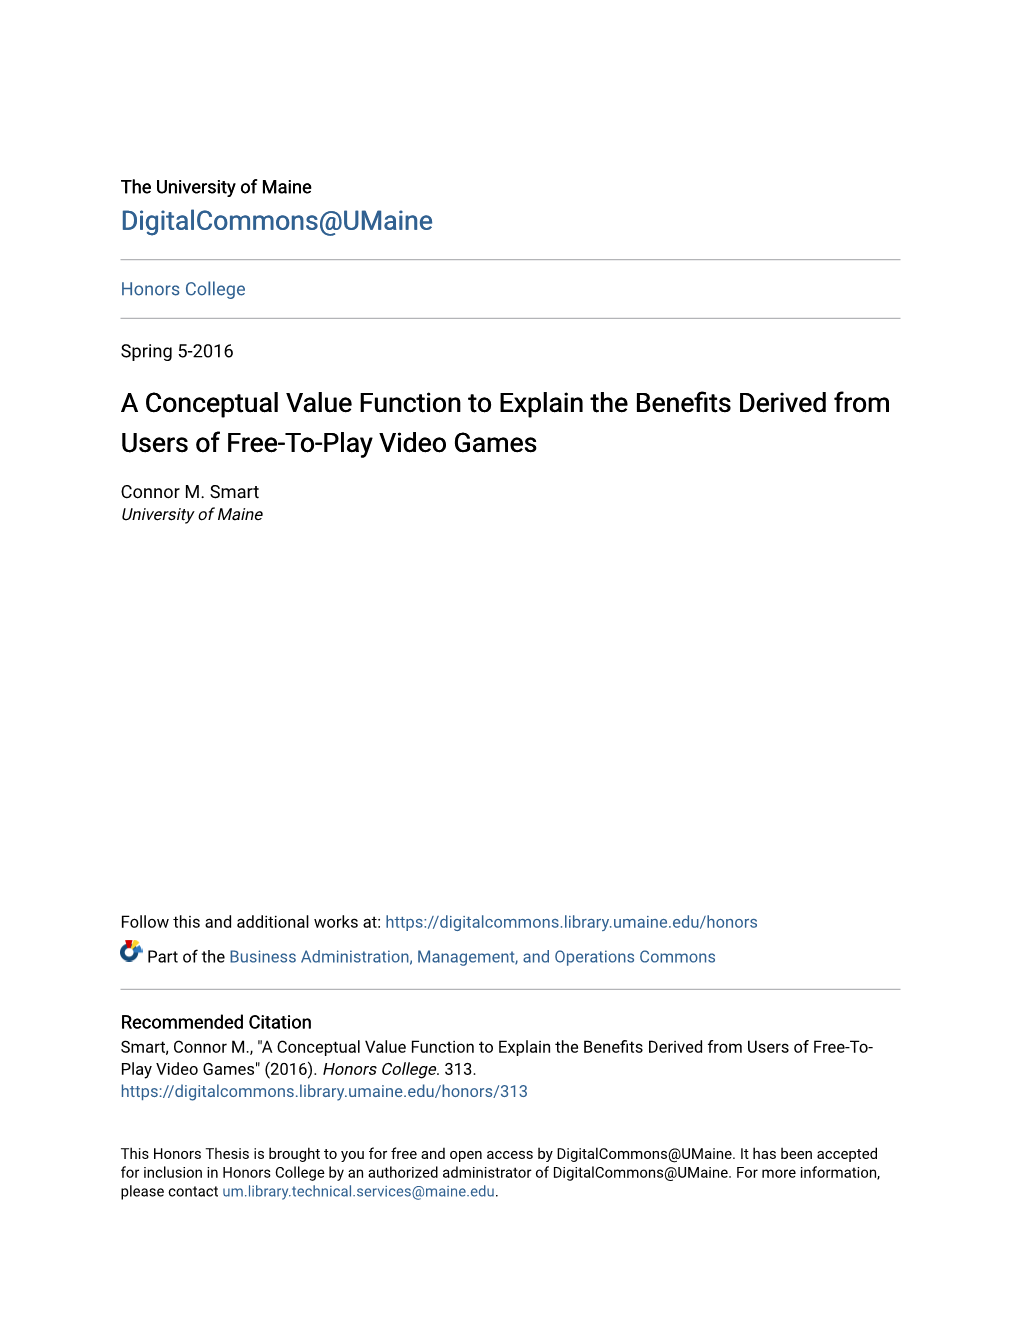 A Conceptual Value Function to Explain the Benefits Derived from Users of Free-To-Play Video Games